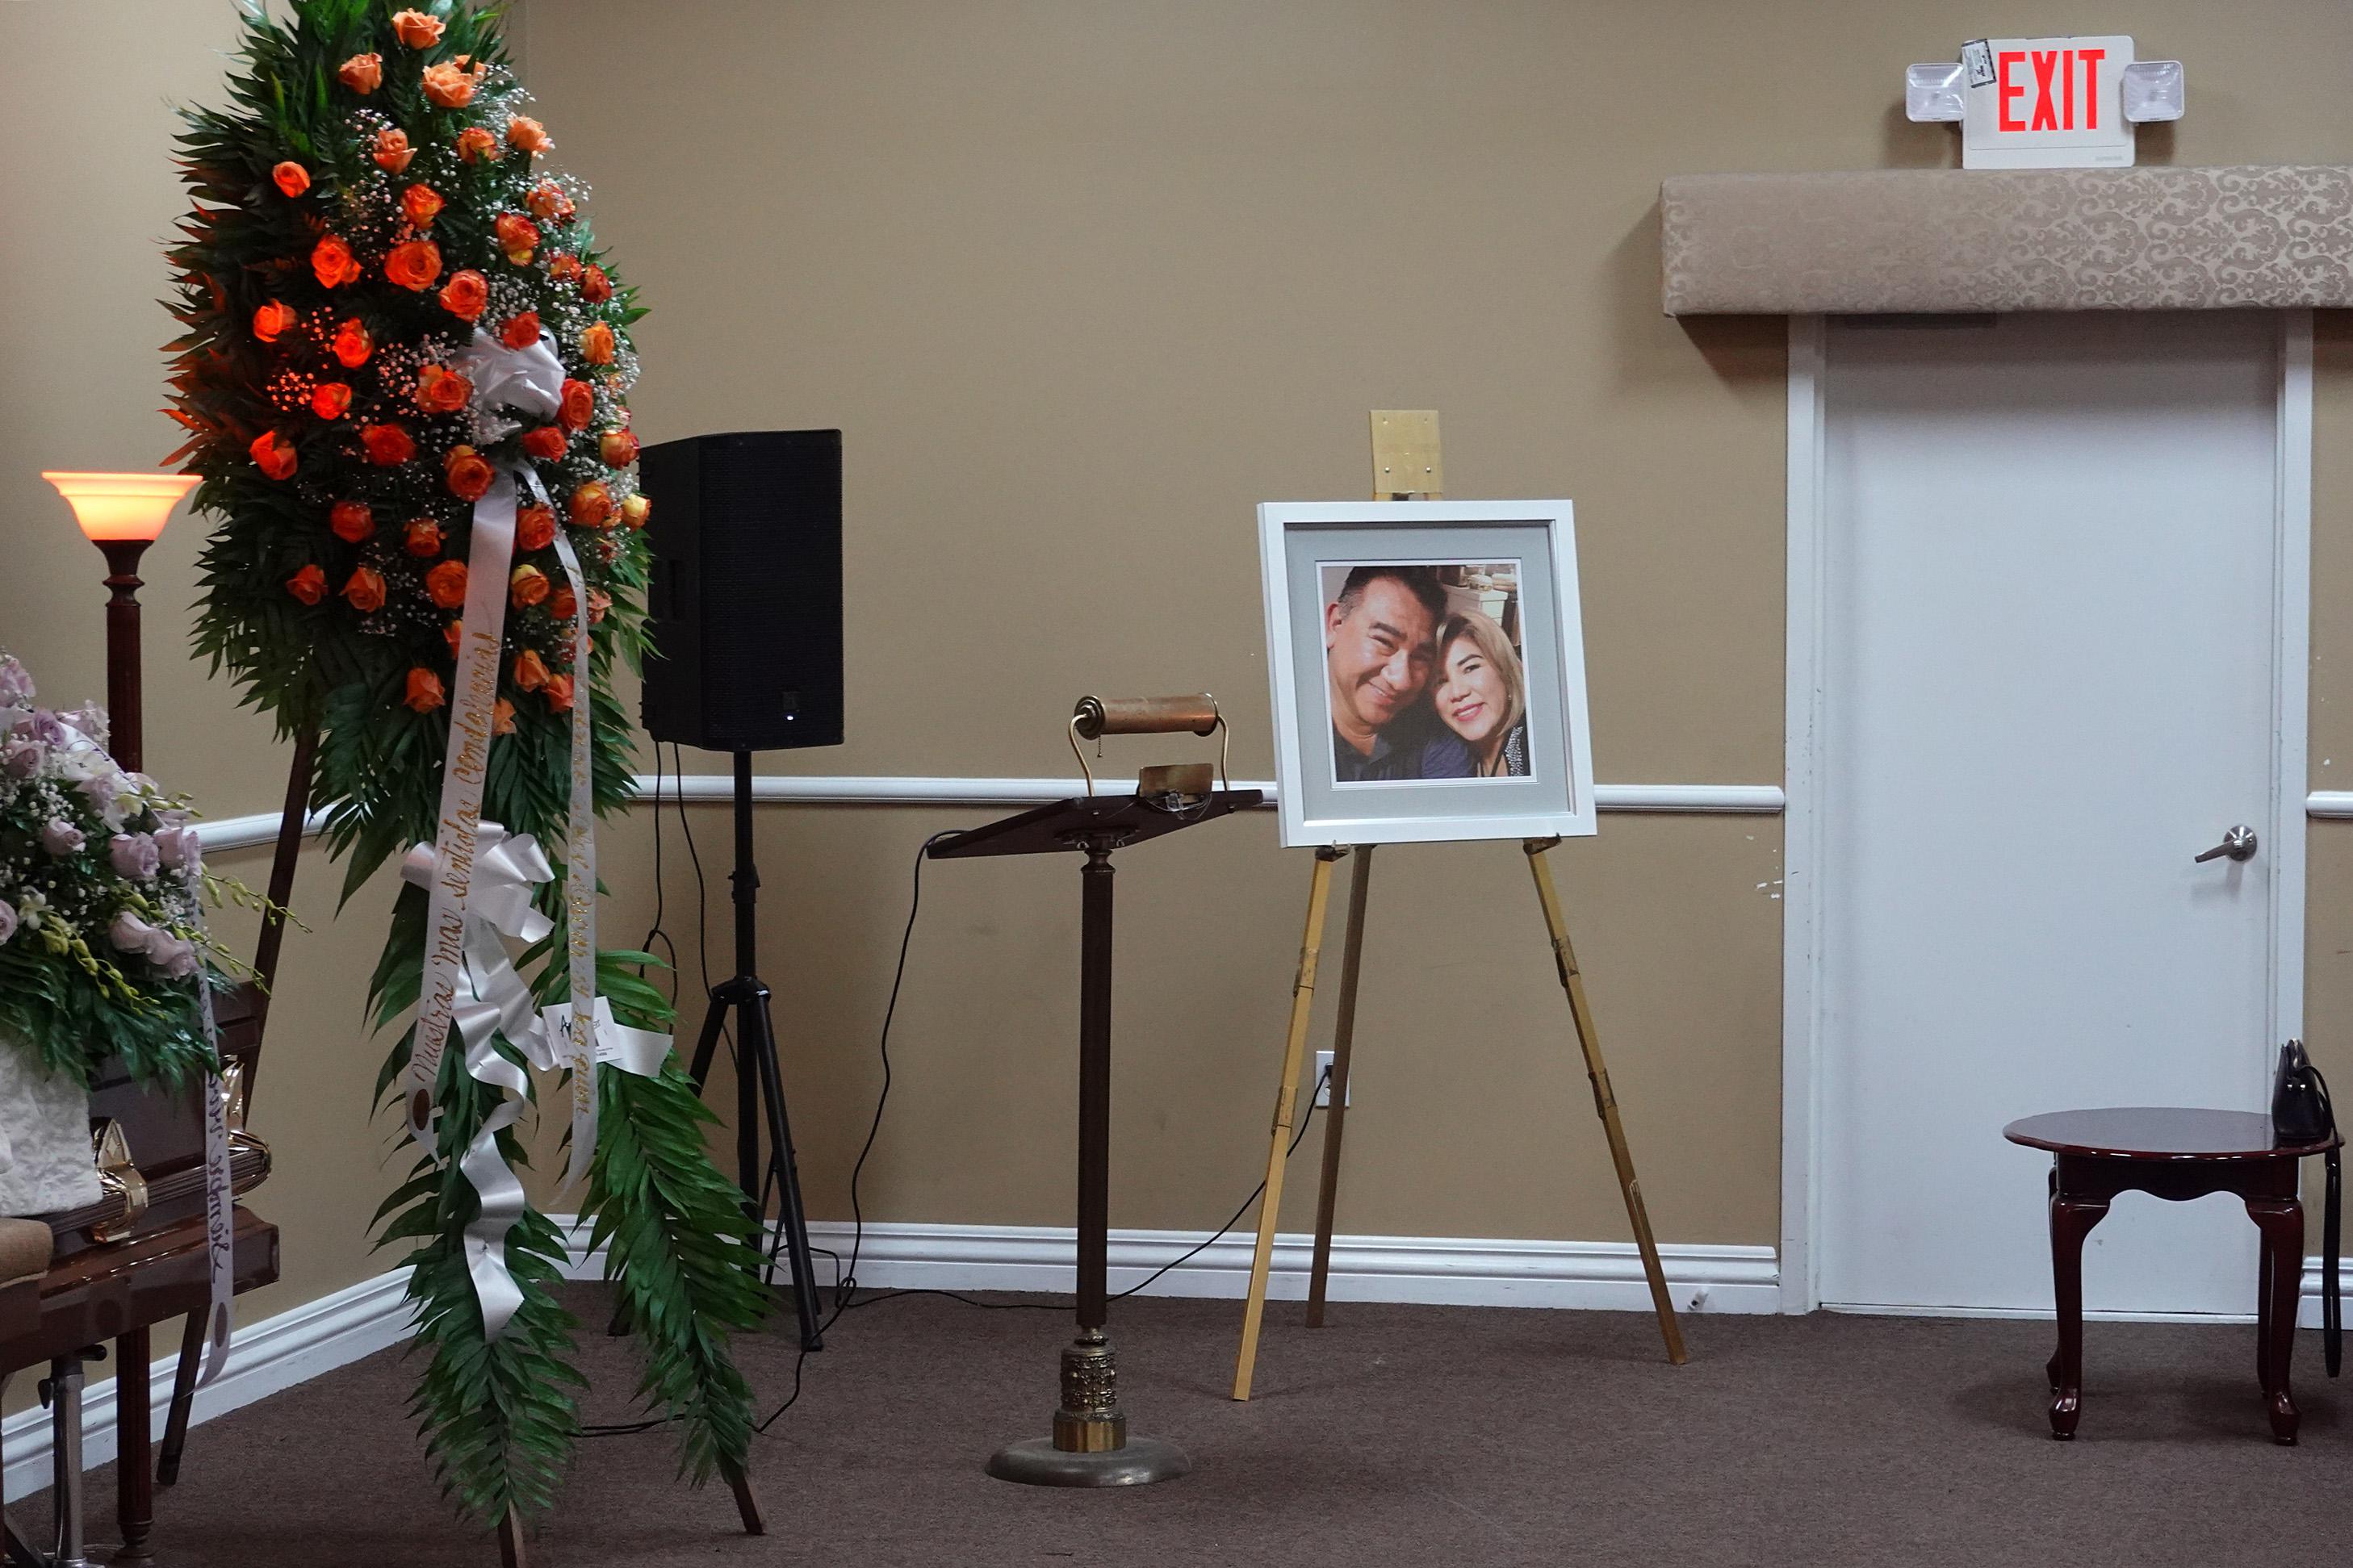 A picture of a couple beside a lectern and flowers in a room empty of people.